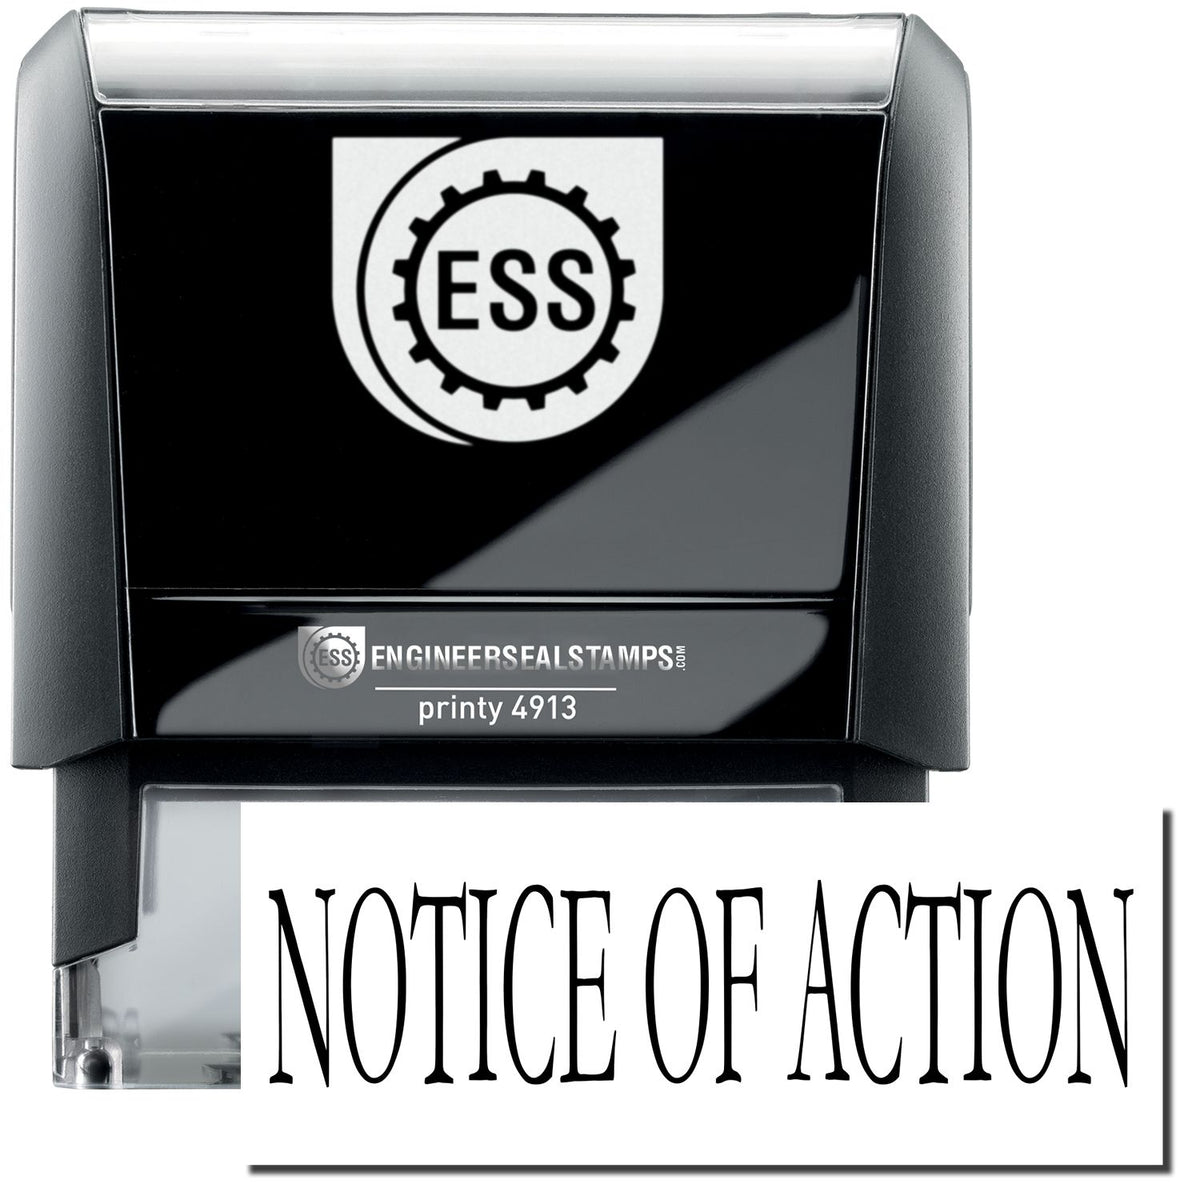 A self-inking stamp with a stamped image showing how the text &quot;NOTICE OF ACTION&quot; in a large font is displayed by it.